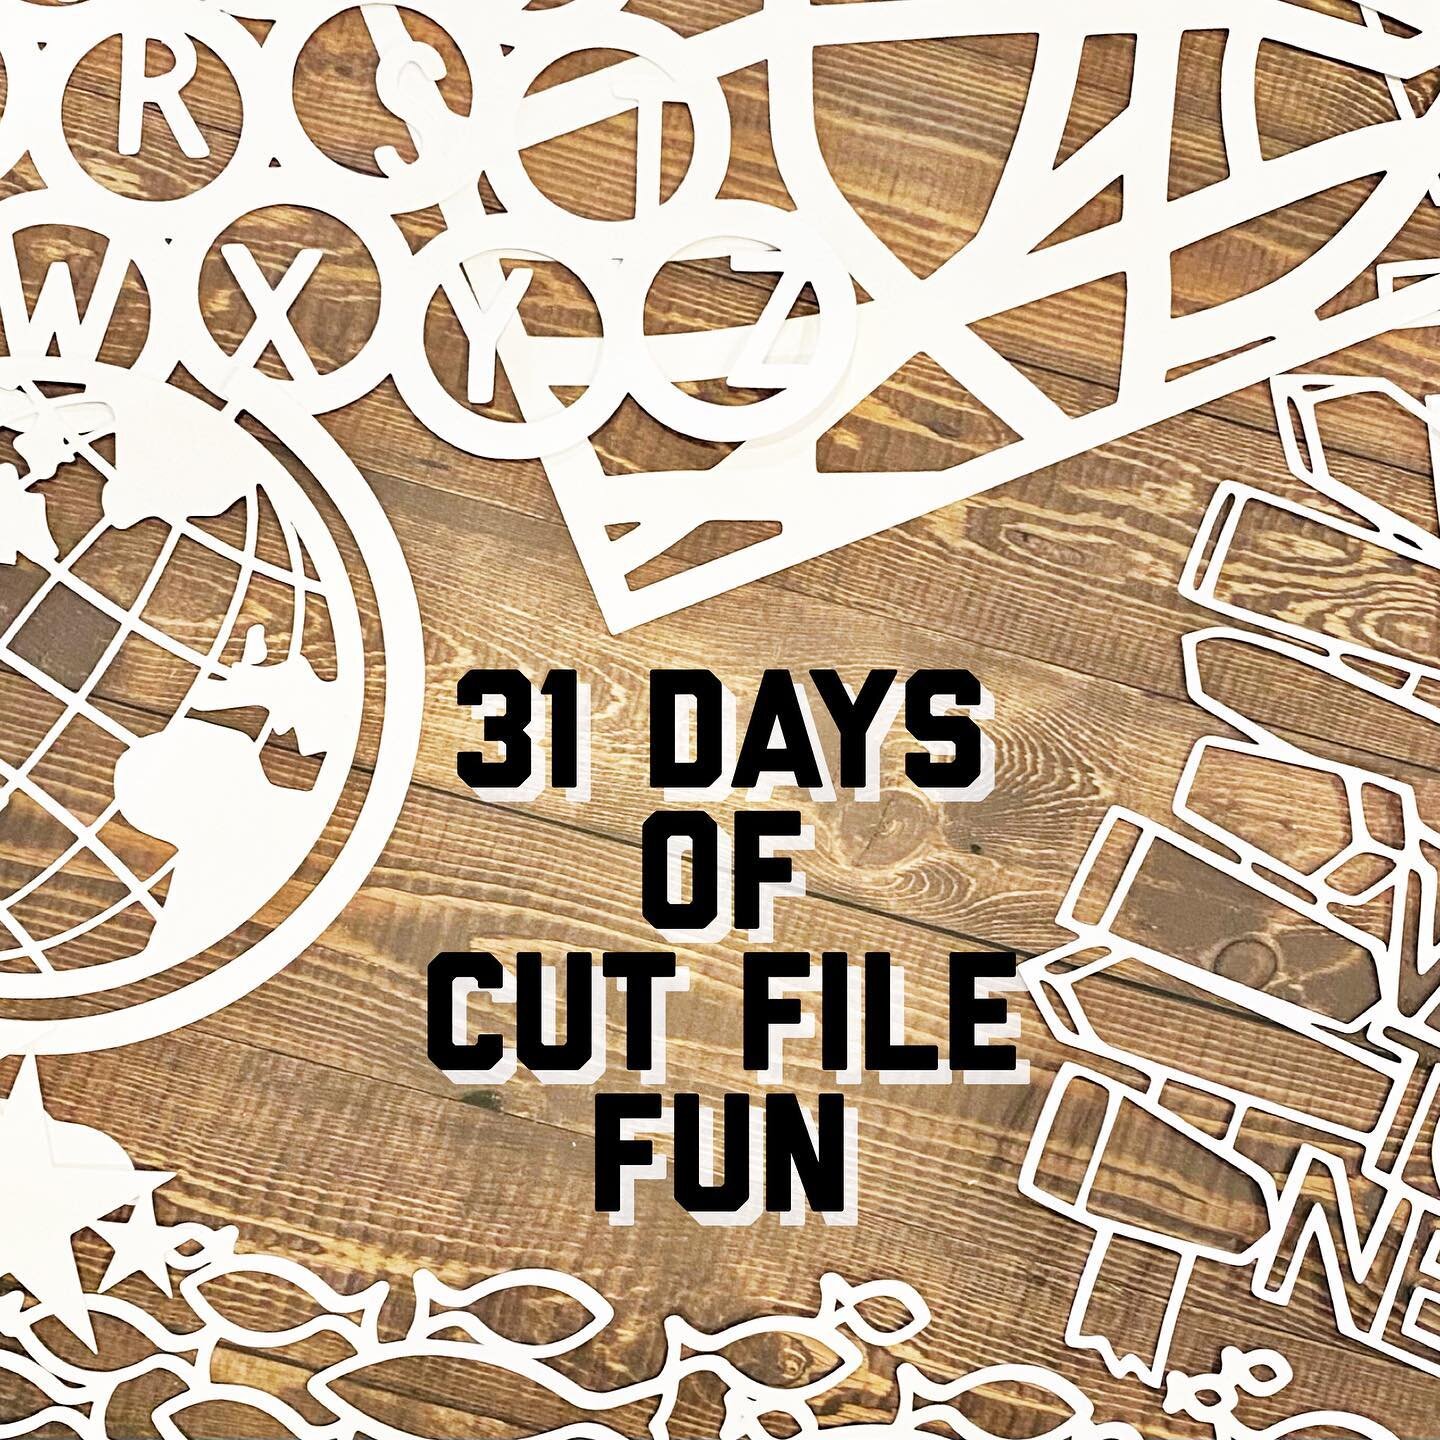 The Facebook live theme for August is going to be 31 days of cut file fun and I&rsquo;m super excited about it and the fact that my dear friend @mkgunn31 is going to be playing along too! We even created a mega pre-cut bundle in the shop now if you w